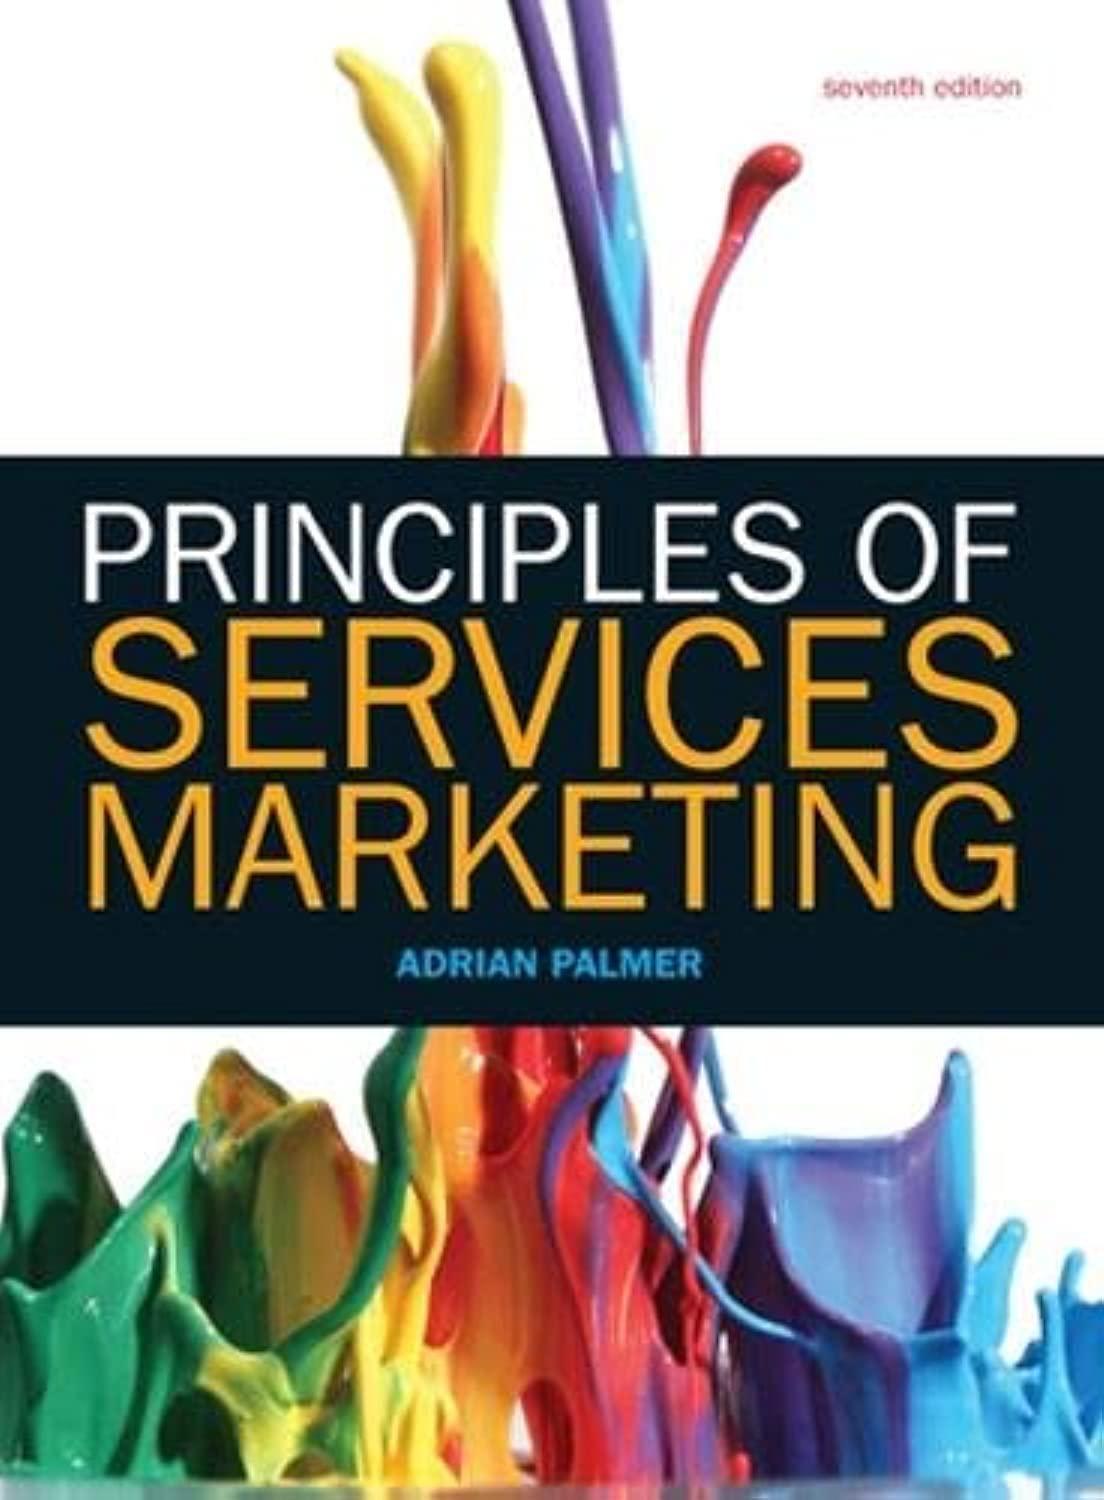 principles of services marketing 7th edition adrian palmer 0077152344, 9780077152345